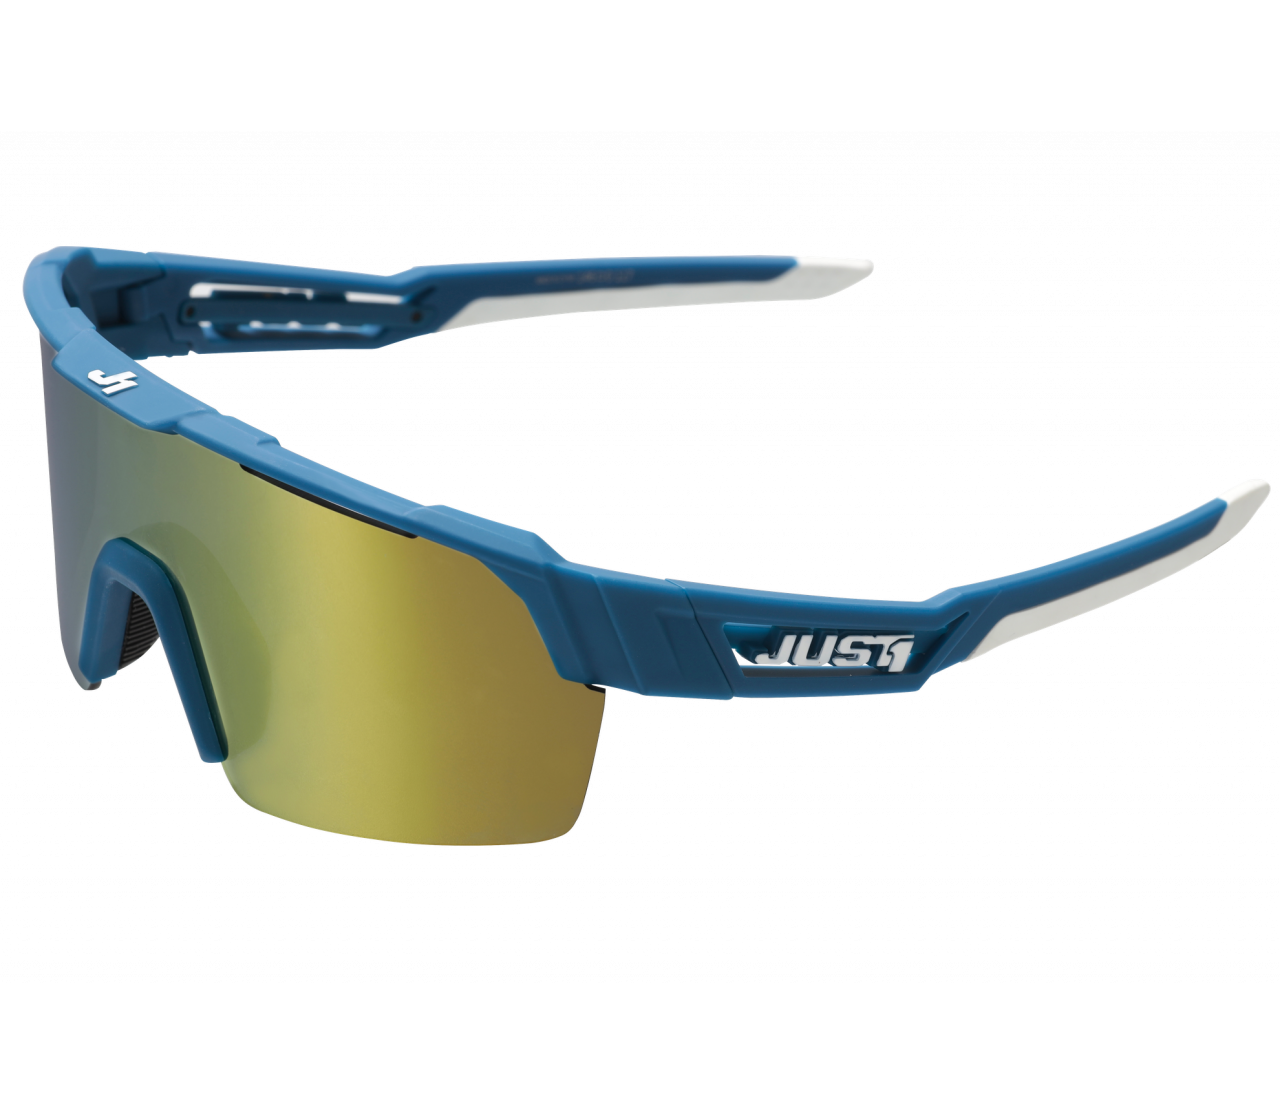 JUST1 SNIPER URBAN BLUE/WHITE with clear yellow lens